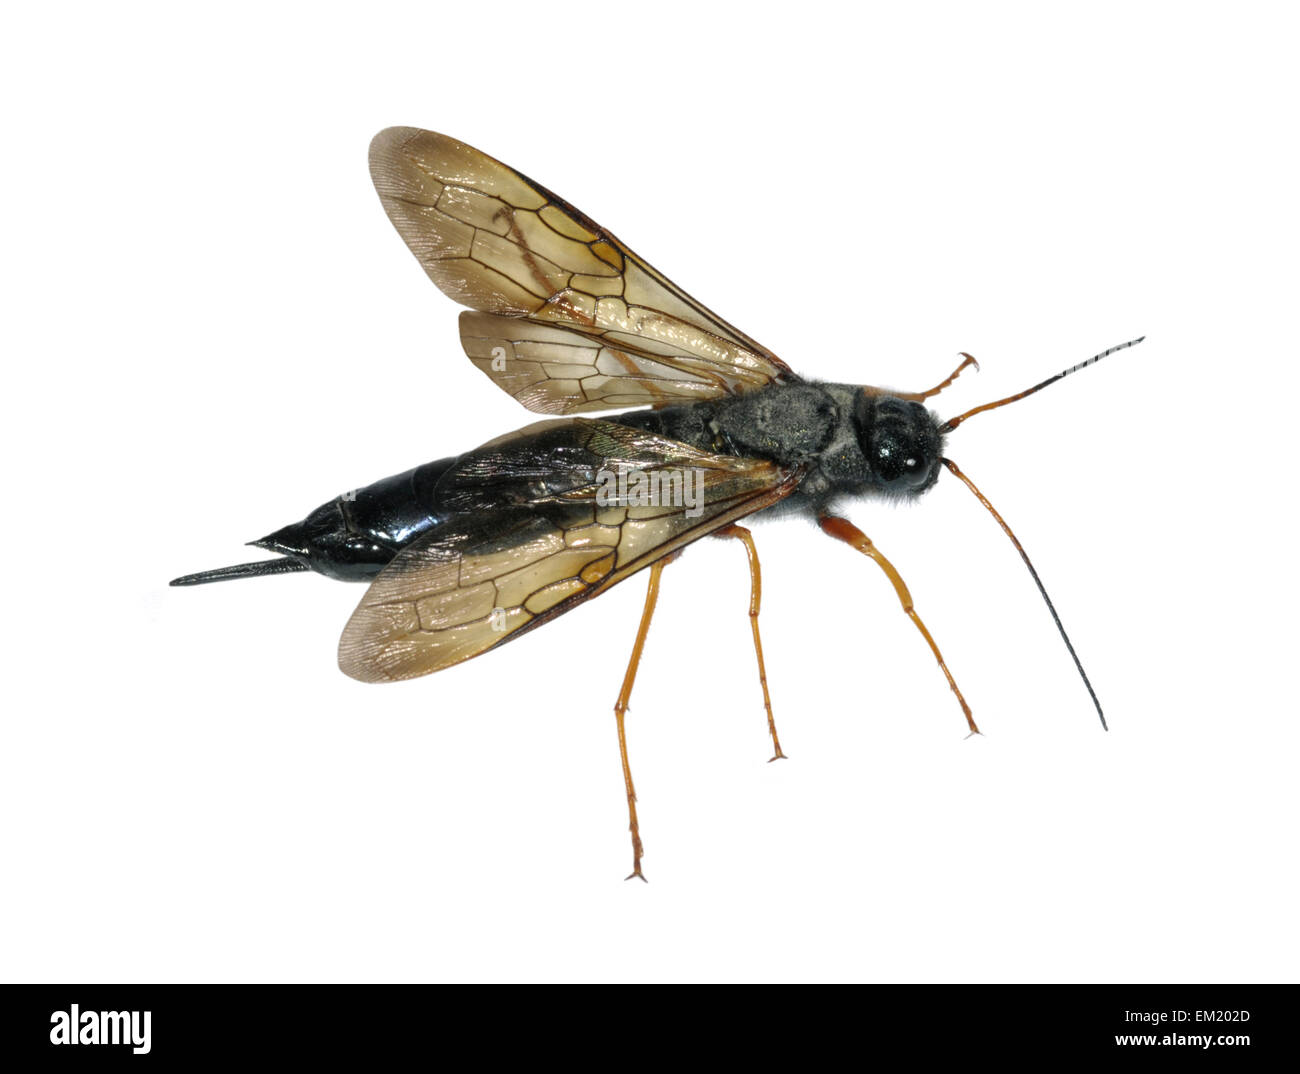 Sirex juvencus - a species of Wood Wasp Stock Photo